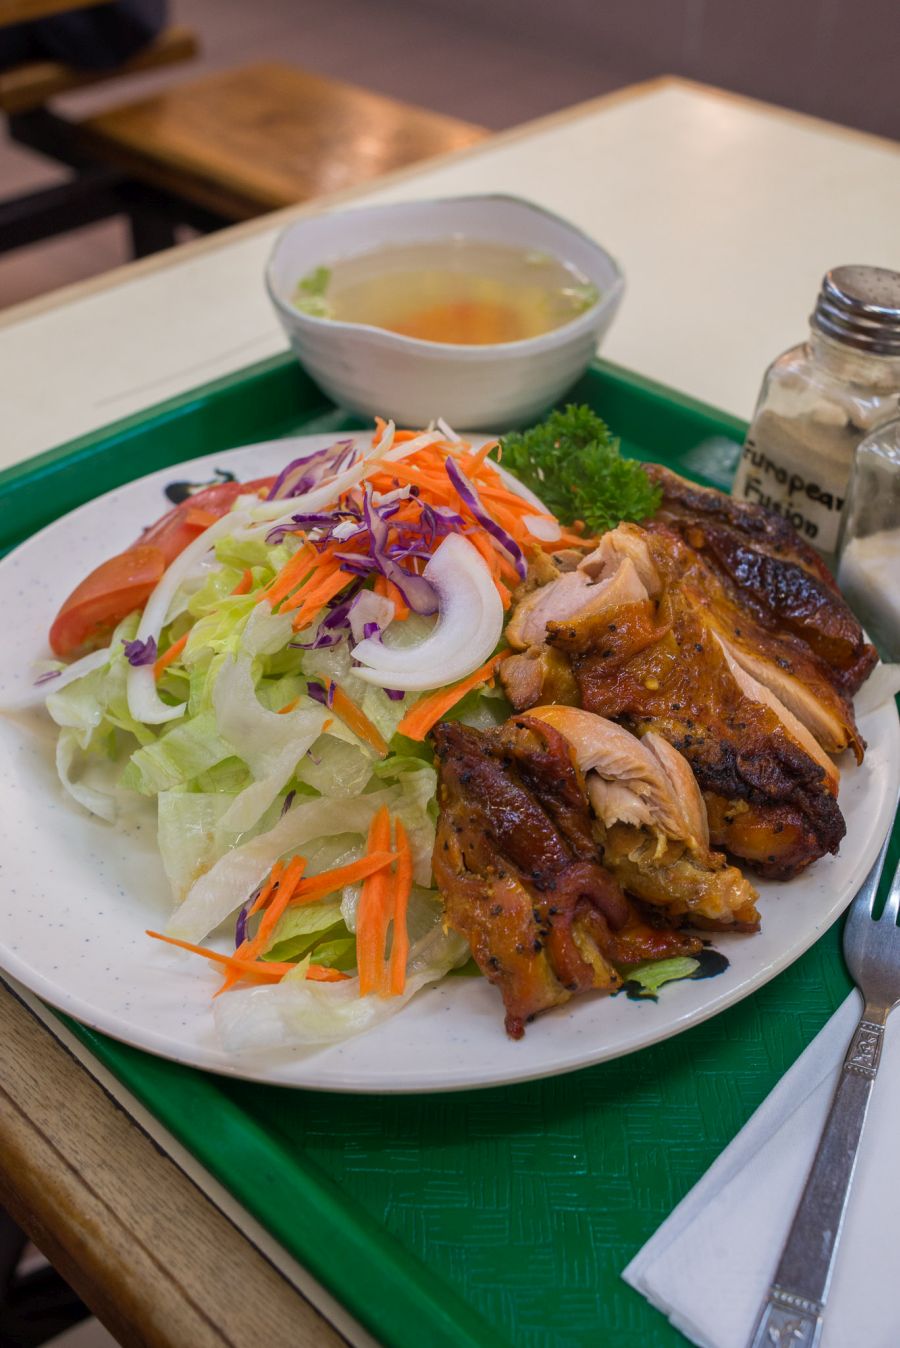 No.13: BBQ chicken and salad with dressing - from Chicks